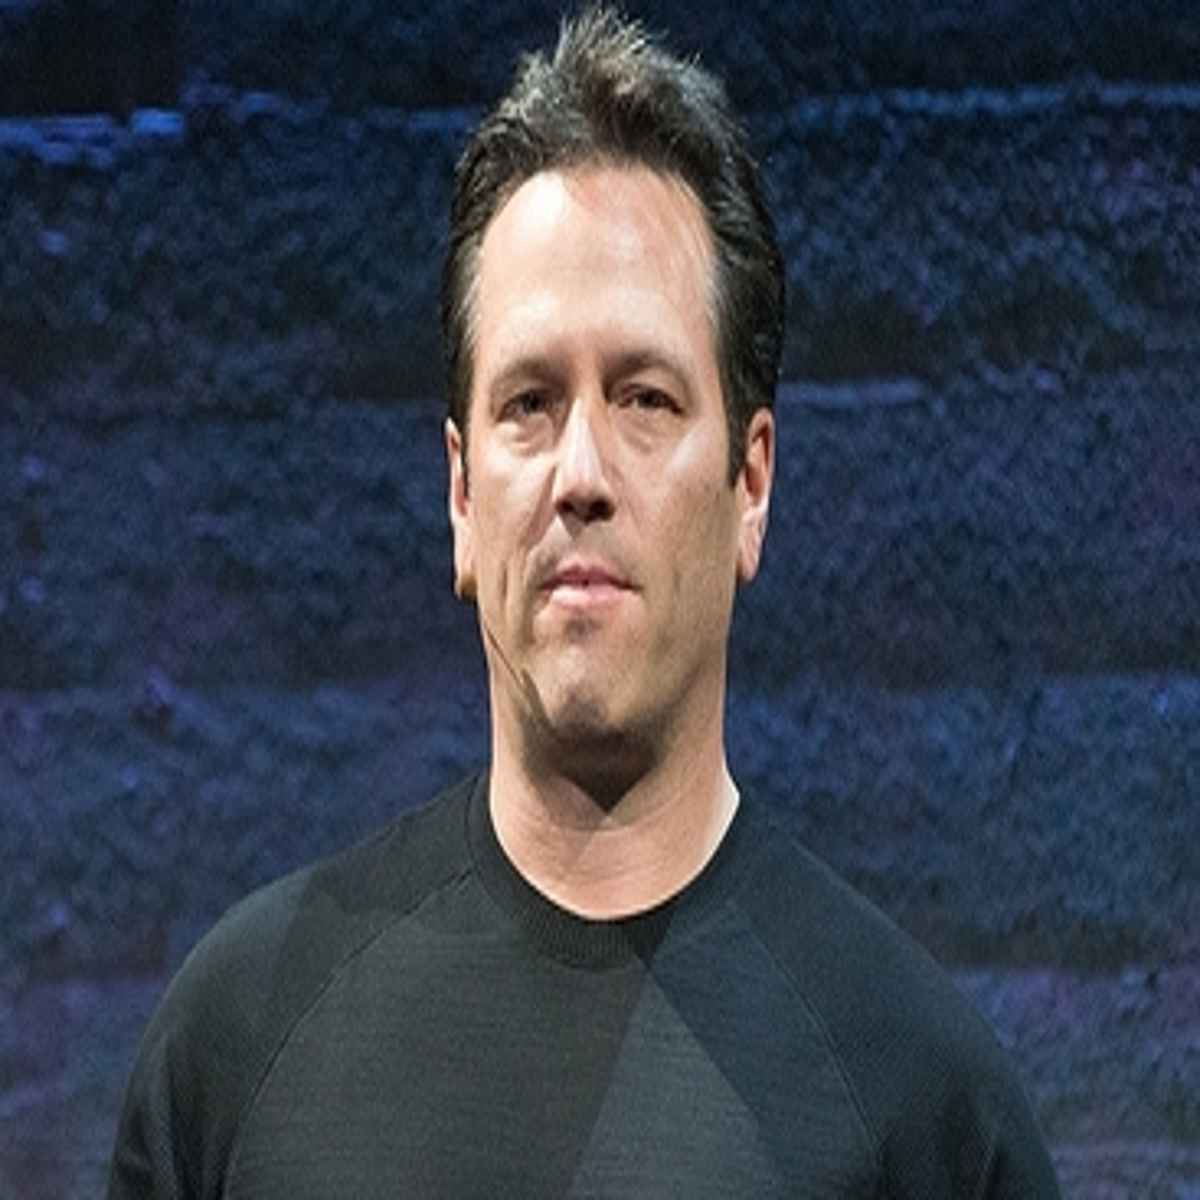 Phil Spencer Net Worth - Employment Security Commission